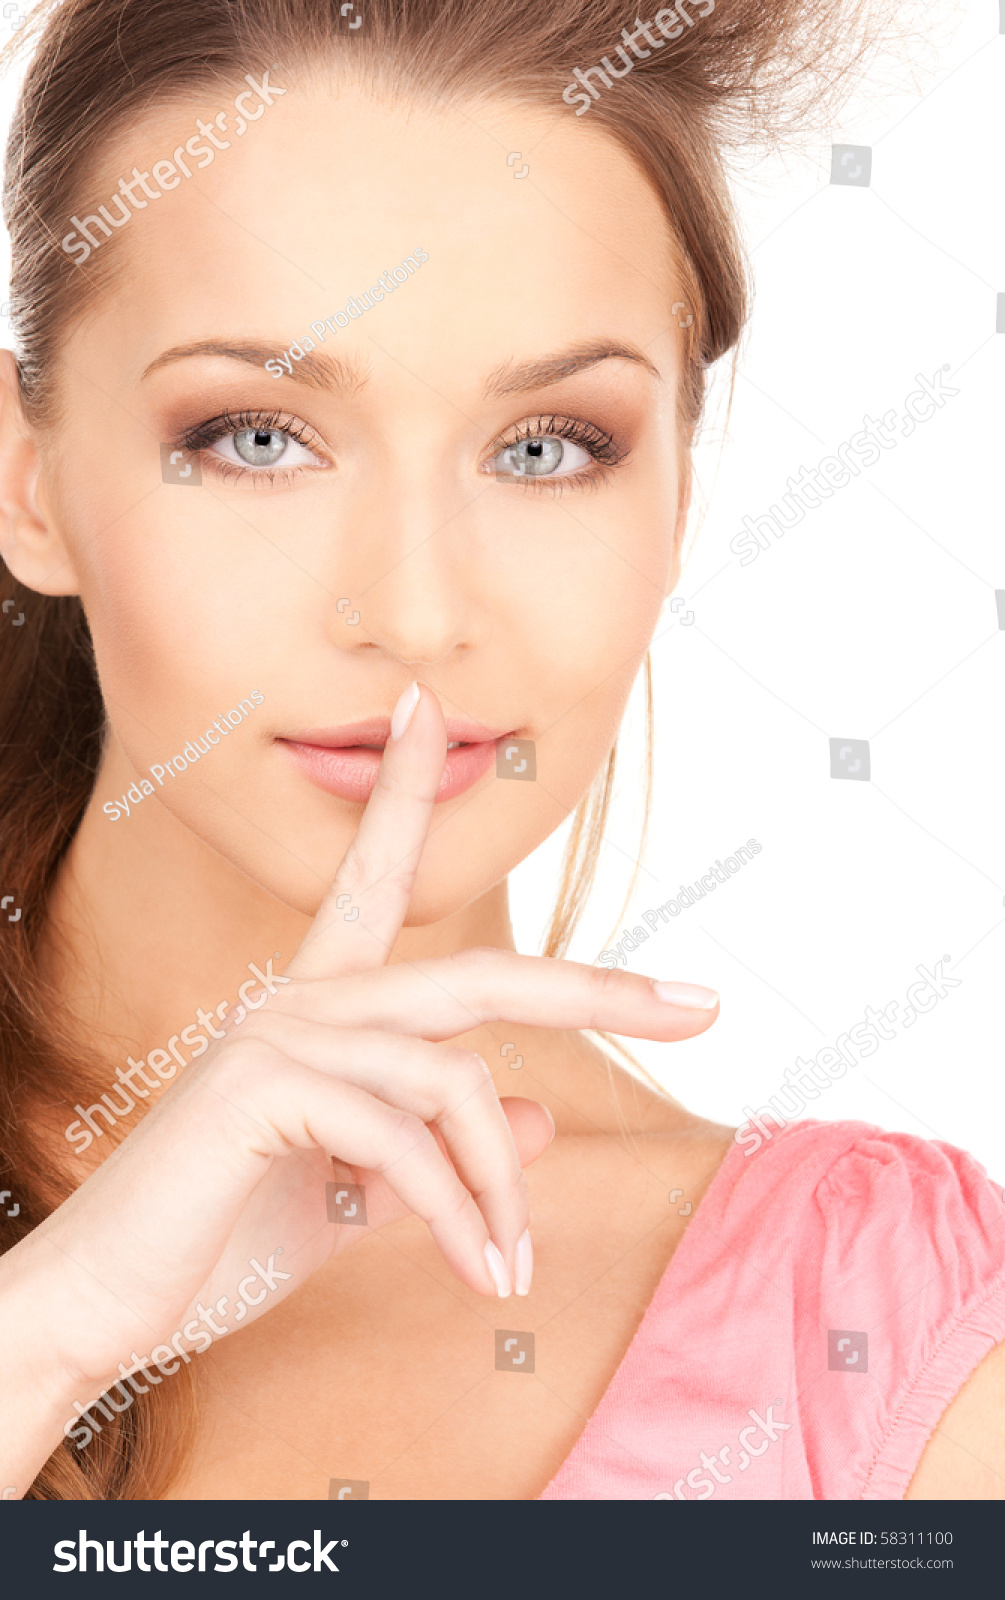 Bright Picture Of Young Woman With Finger On Lips Stock Photo 58311100 ...